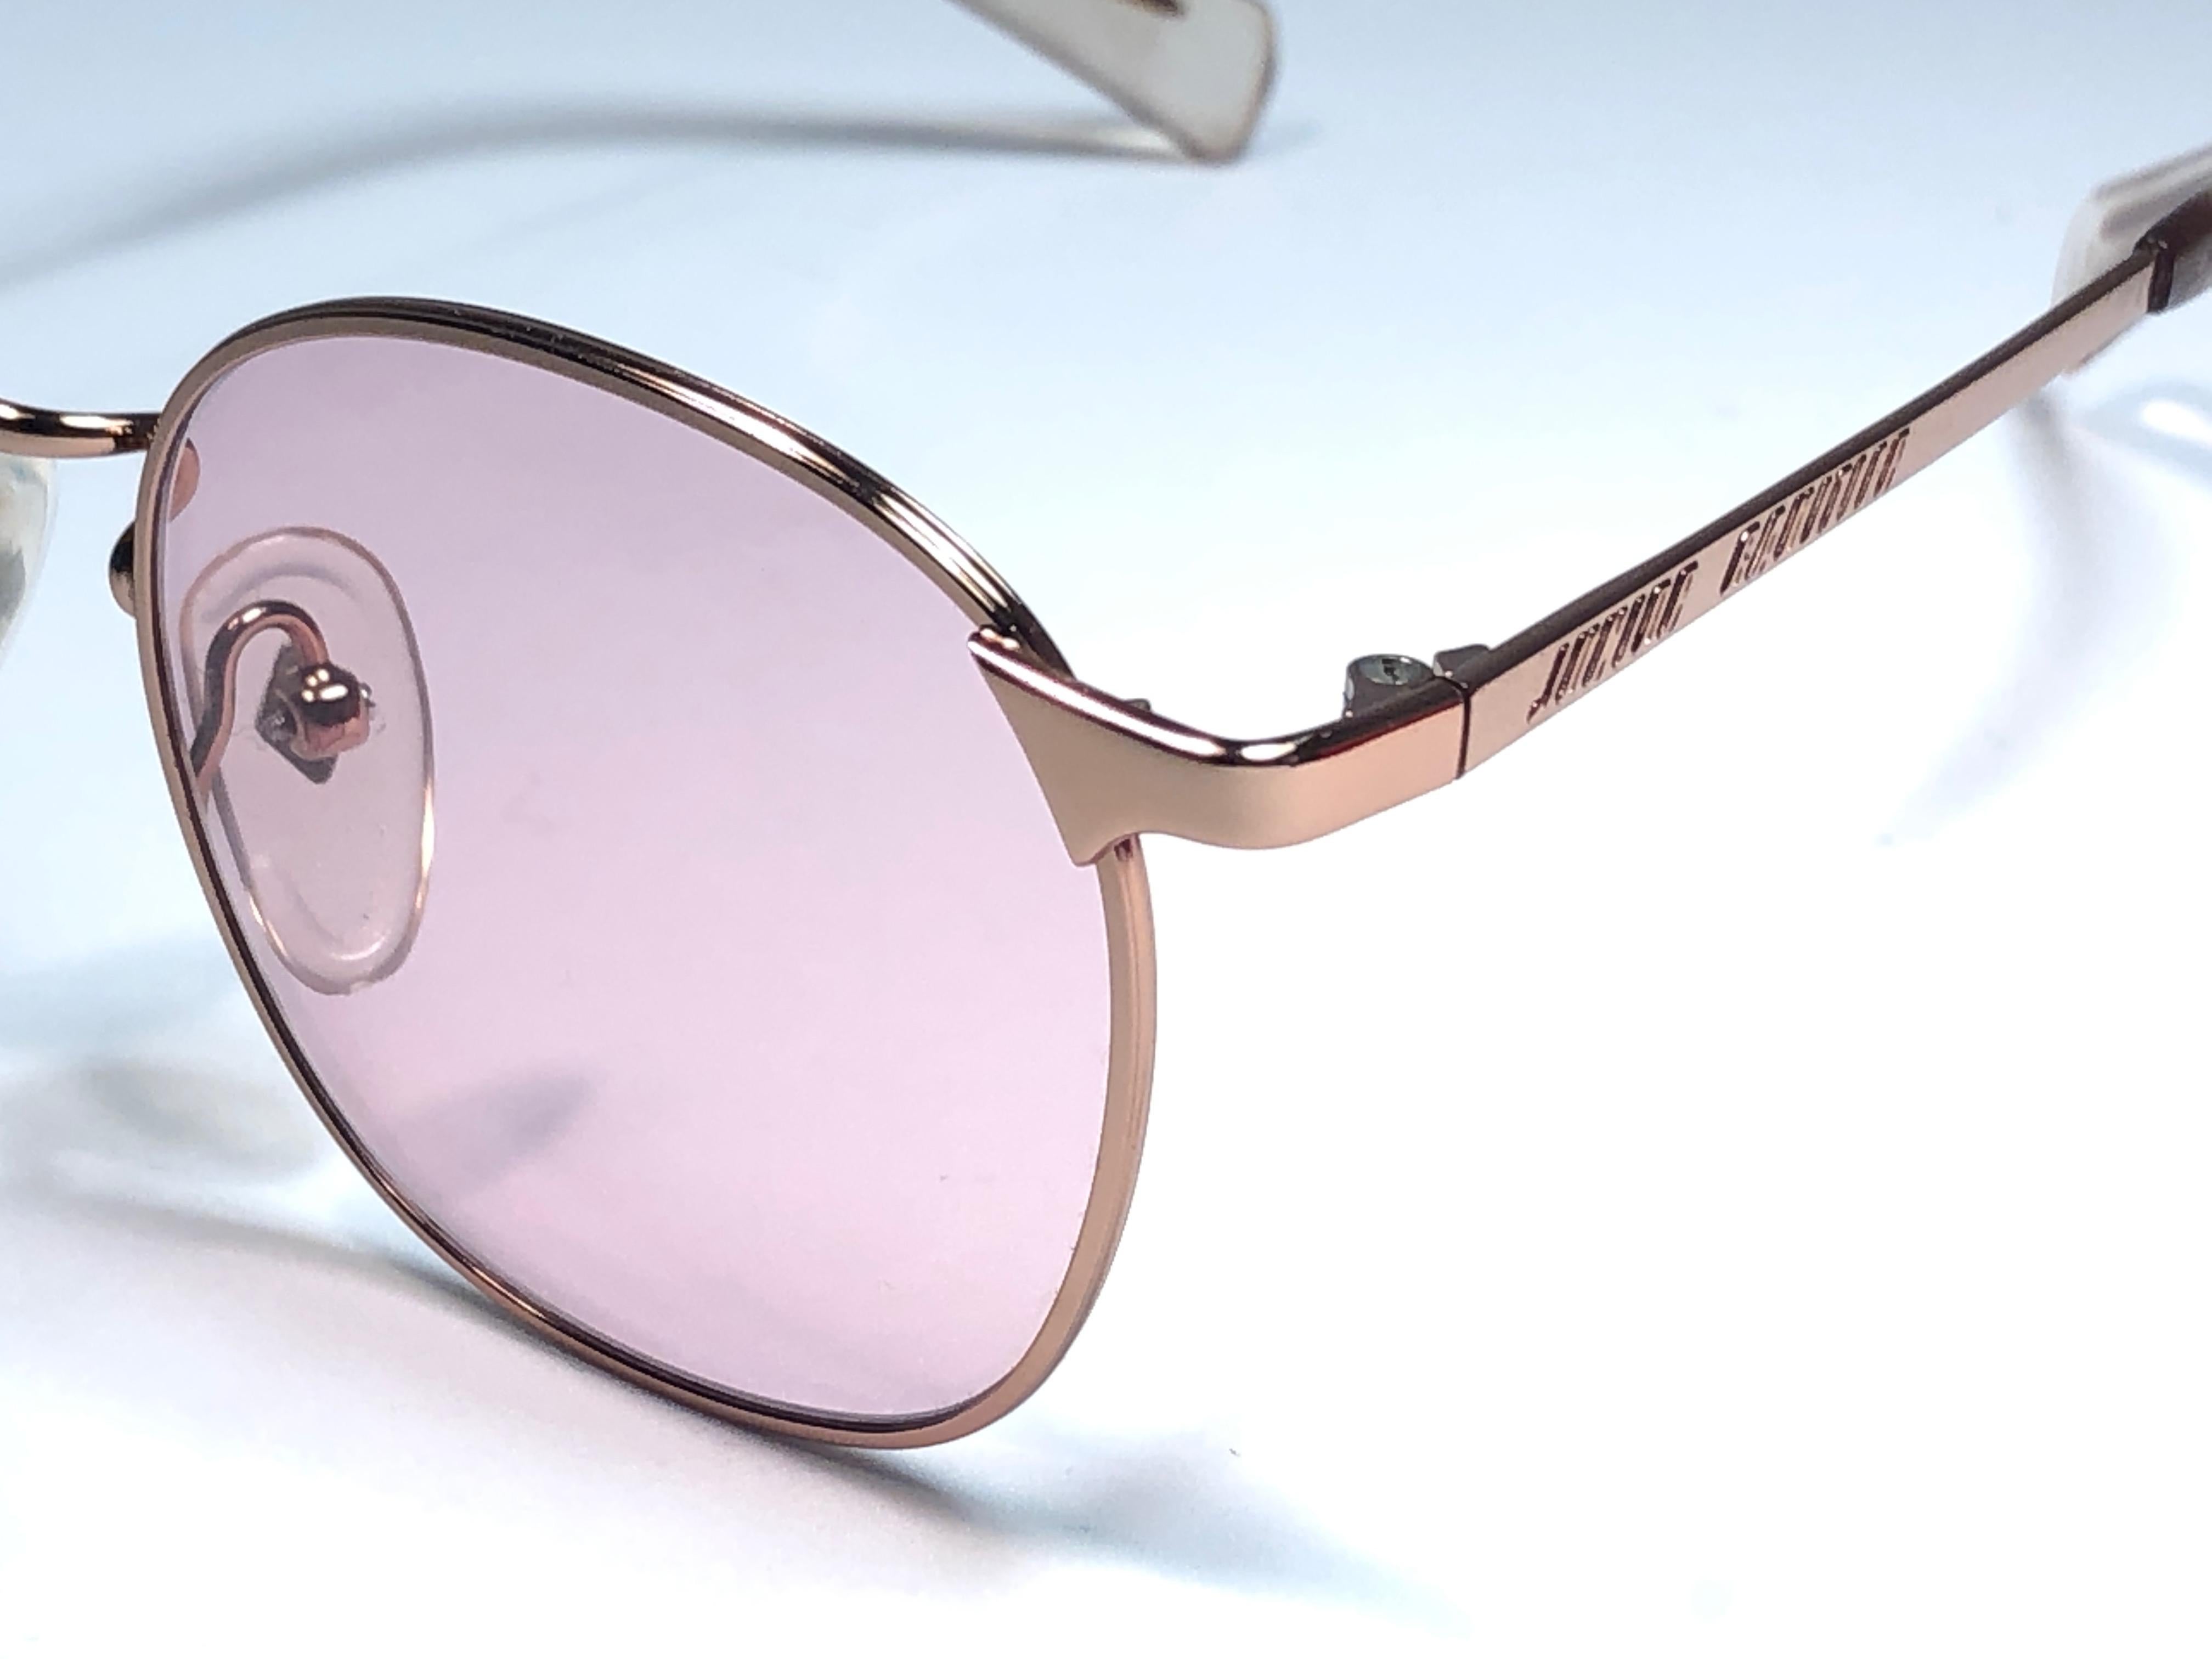 New Jean Paul Gaultier Junior 57 0172 Rose Gold Sunglasses 1990 Made in Japan  For Sale 1